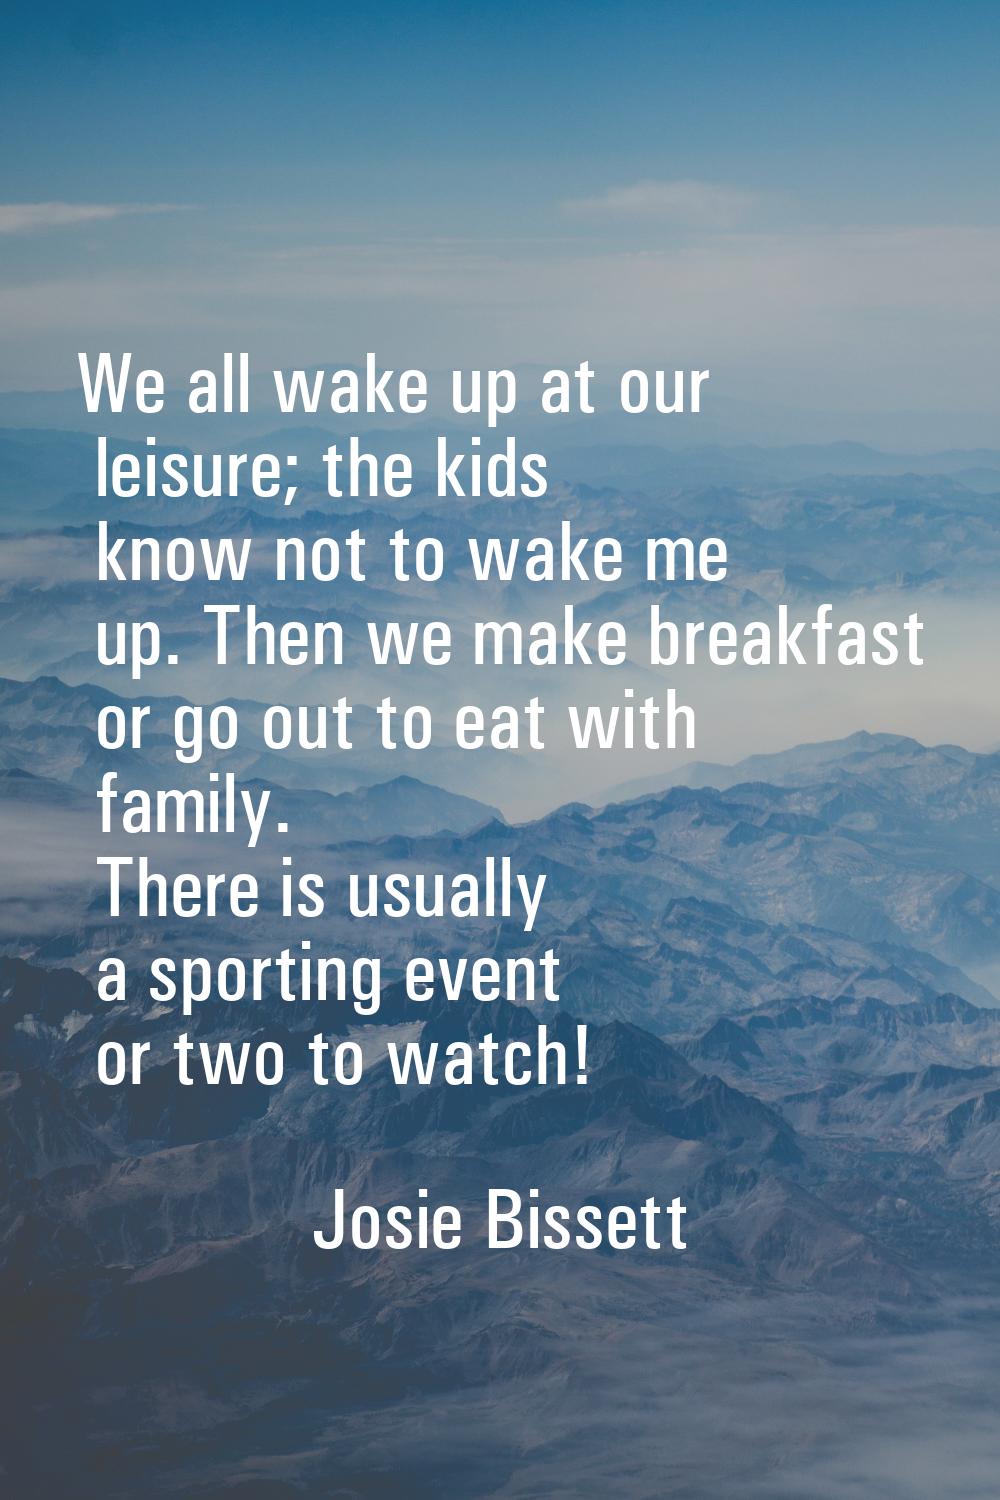 We all wake up at our leisure; the kids know not to wake me up. Then we make breakfast or go out to